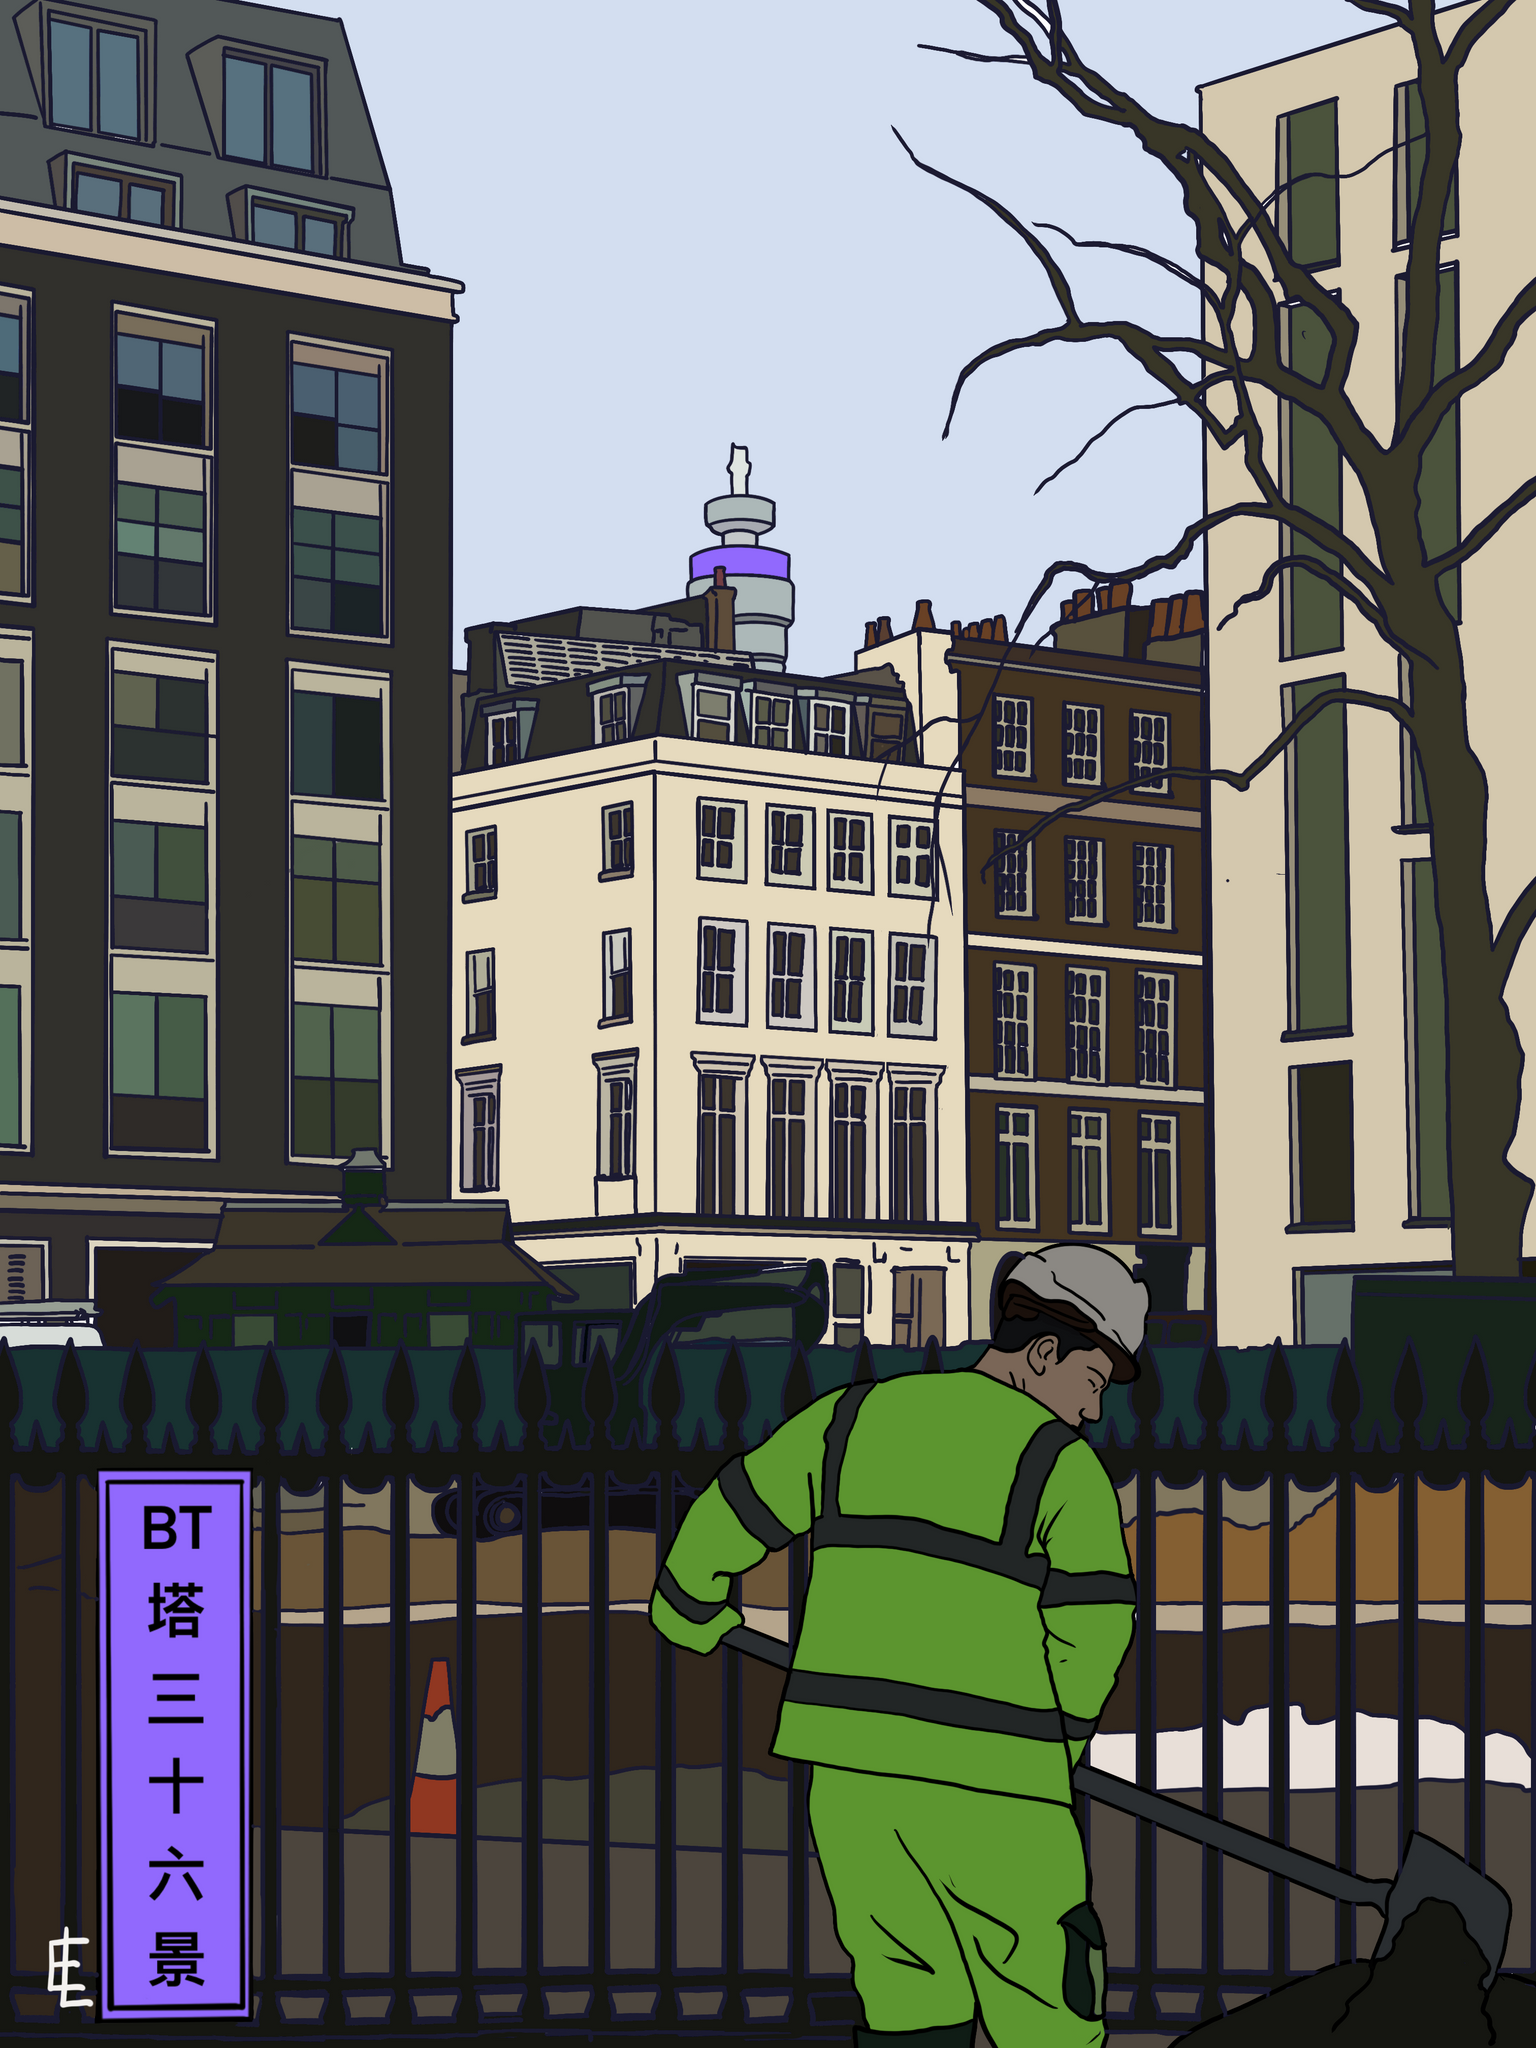 ‘At Work’: BT Tower from Hanover Square